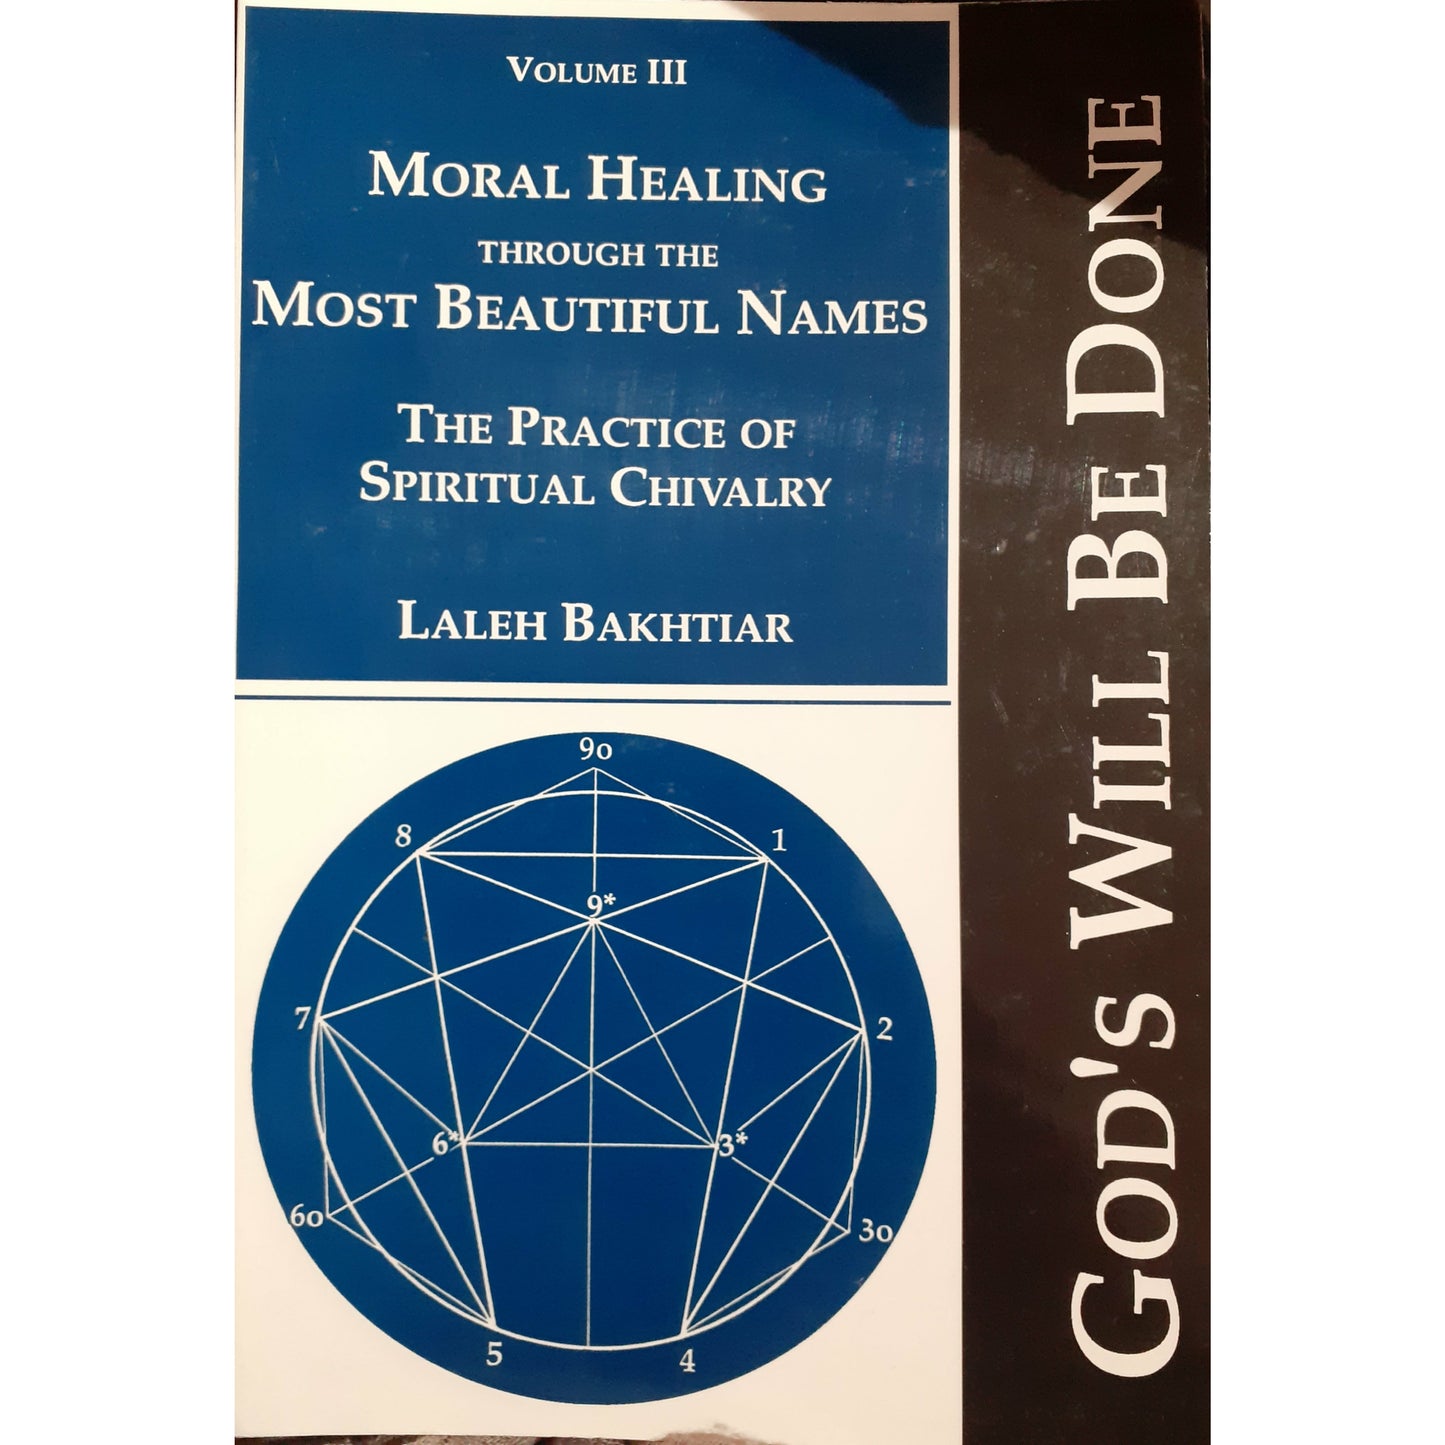 Moral Healing Through the Most Beautiful Names: The Practice of Spiritual Chivalry